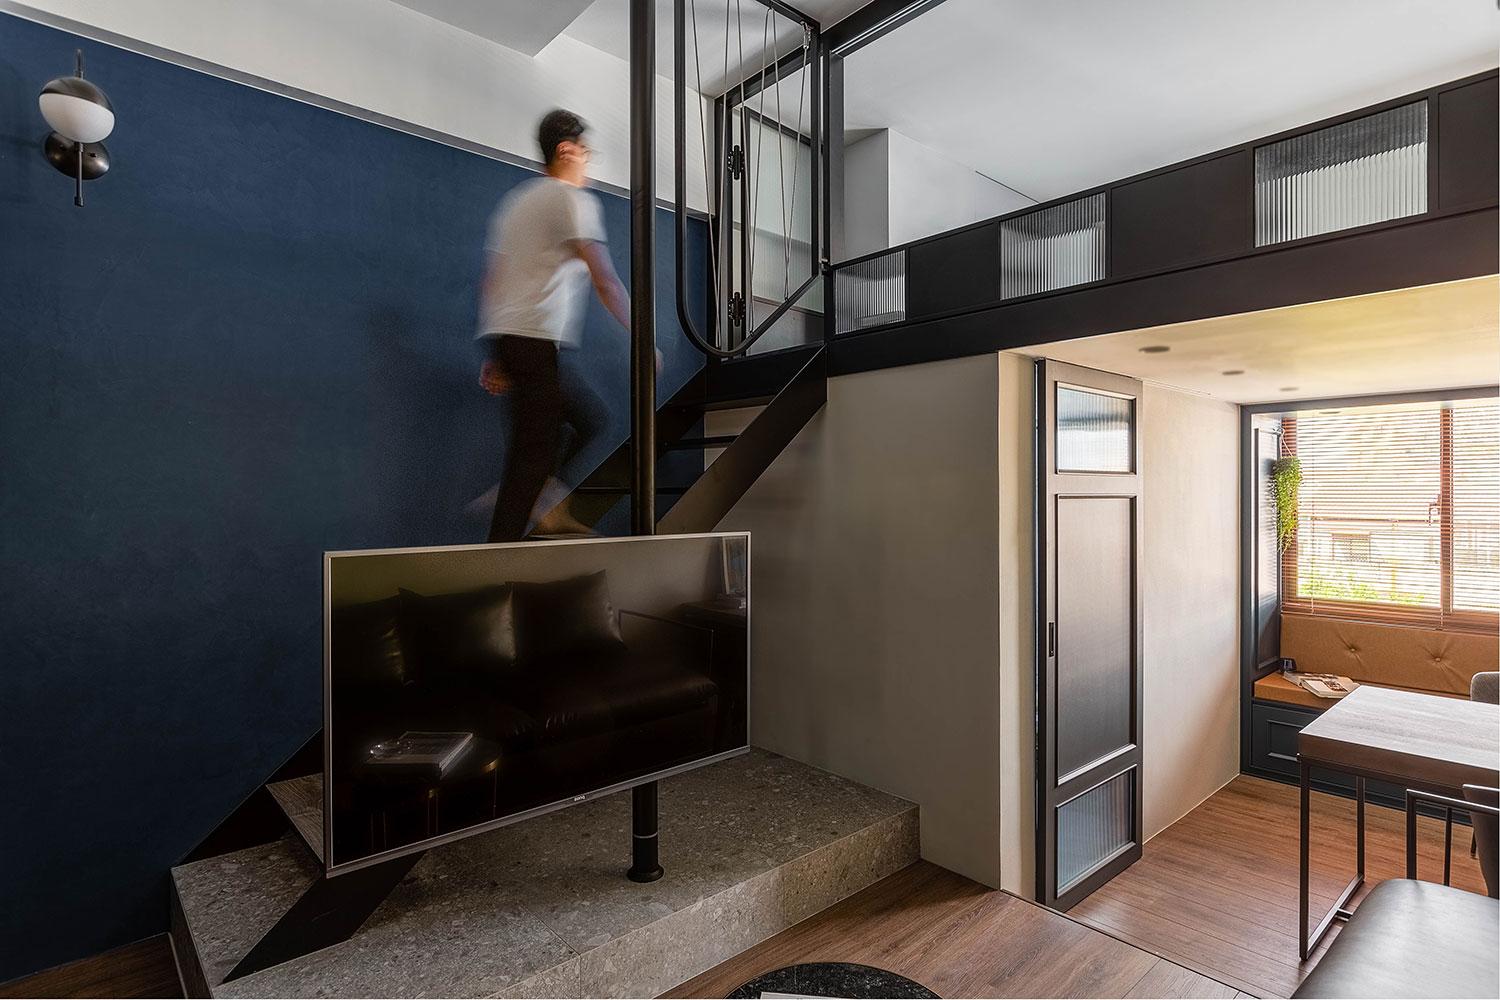 This Loft in Taipei Combines Industrial Design with French Elegance